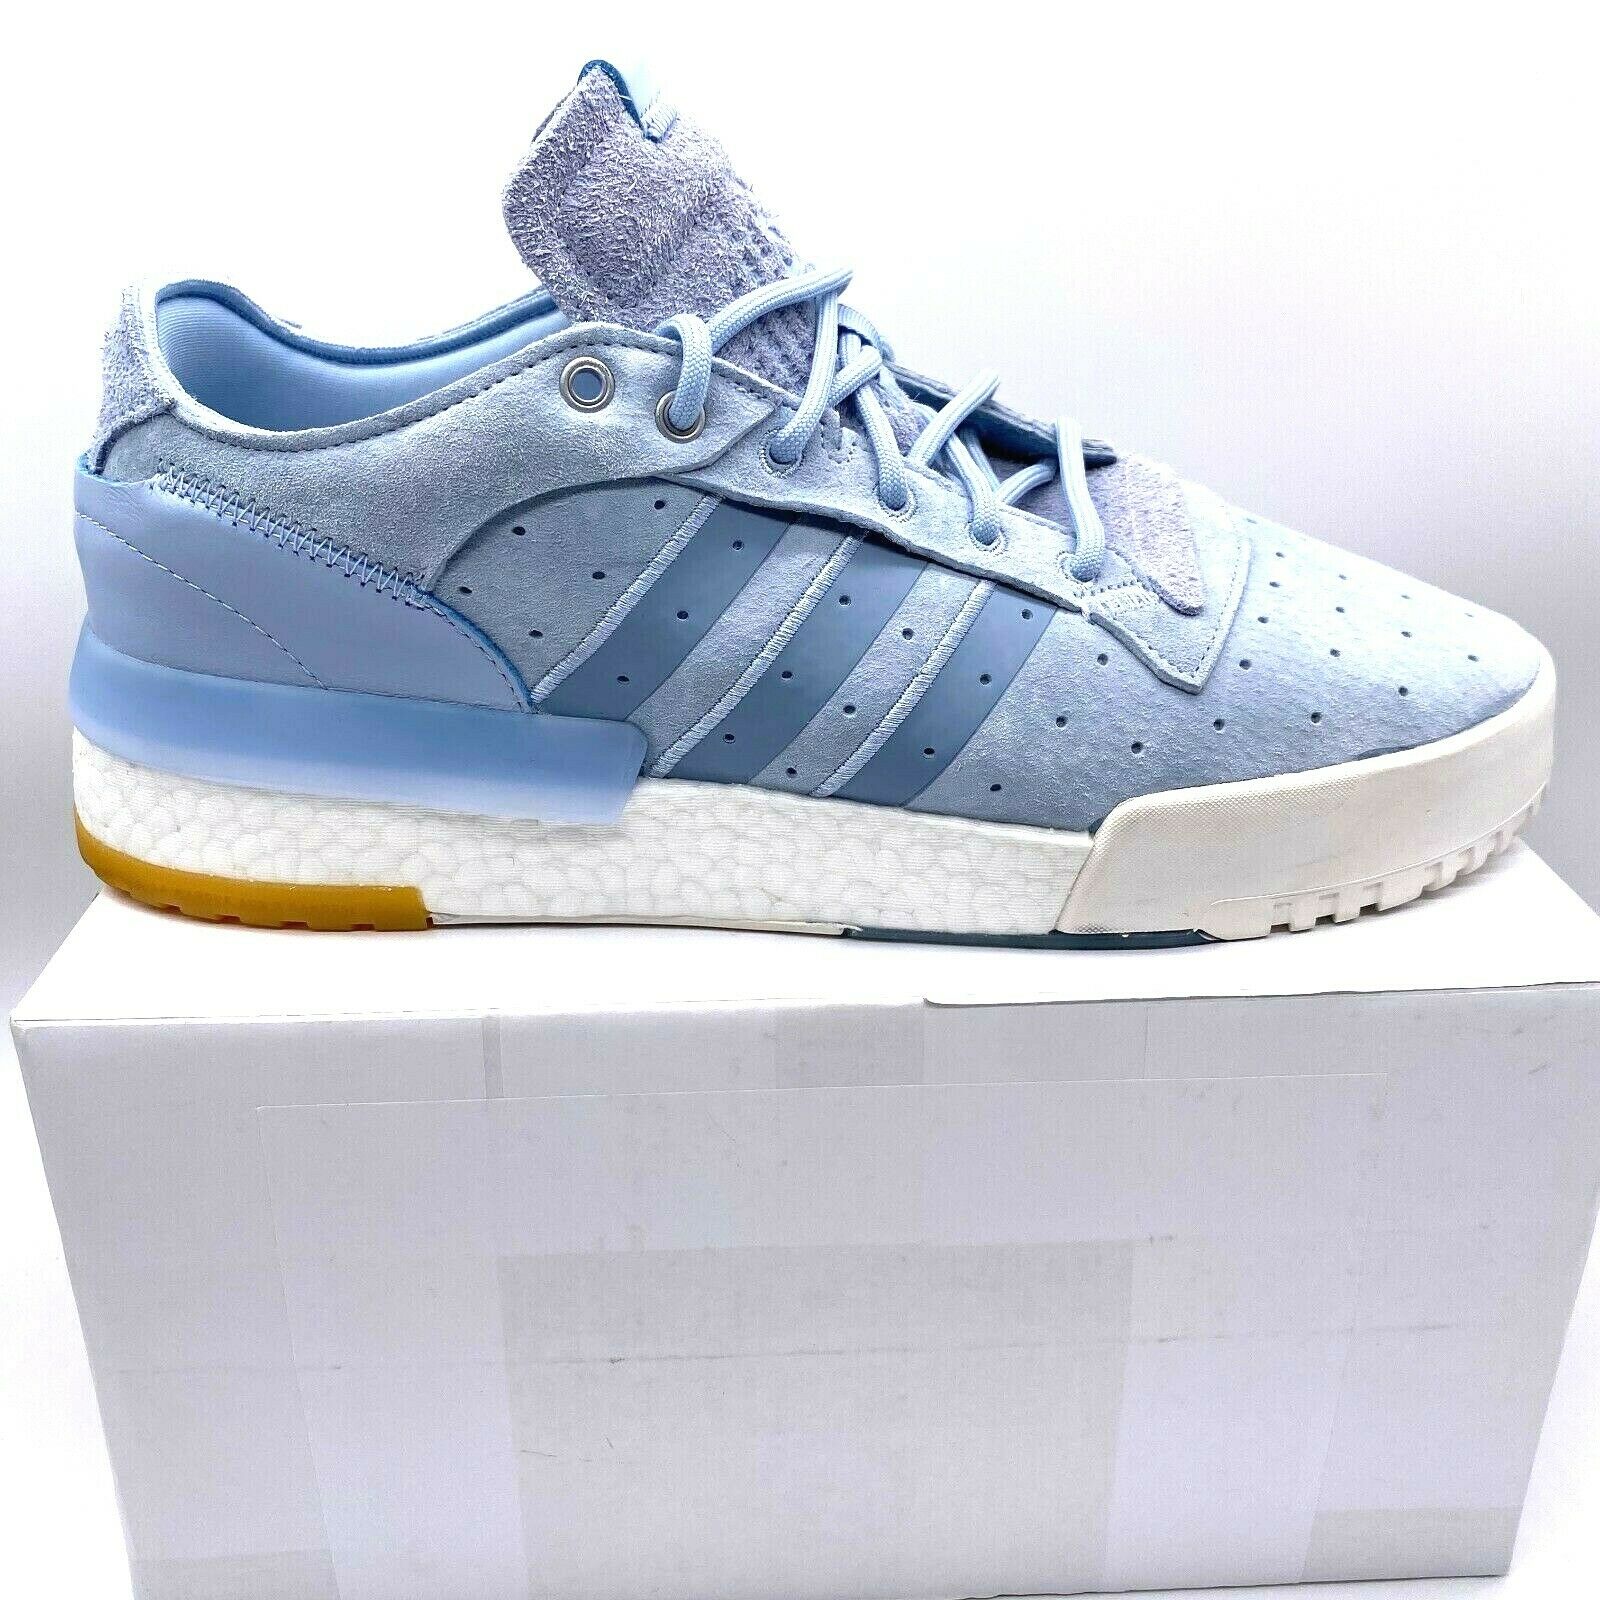 Adidas Rivalry RM Low Sneaker Shoes Easy Blue New Boost EE4988 Men's Size 12.5